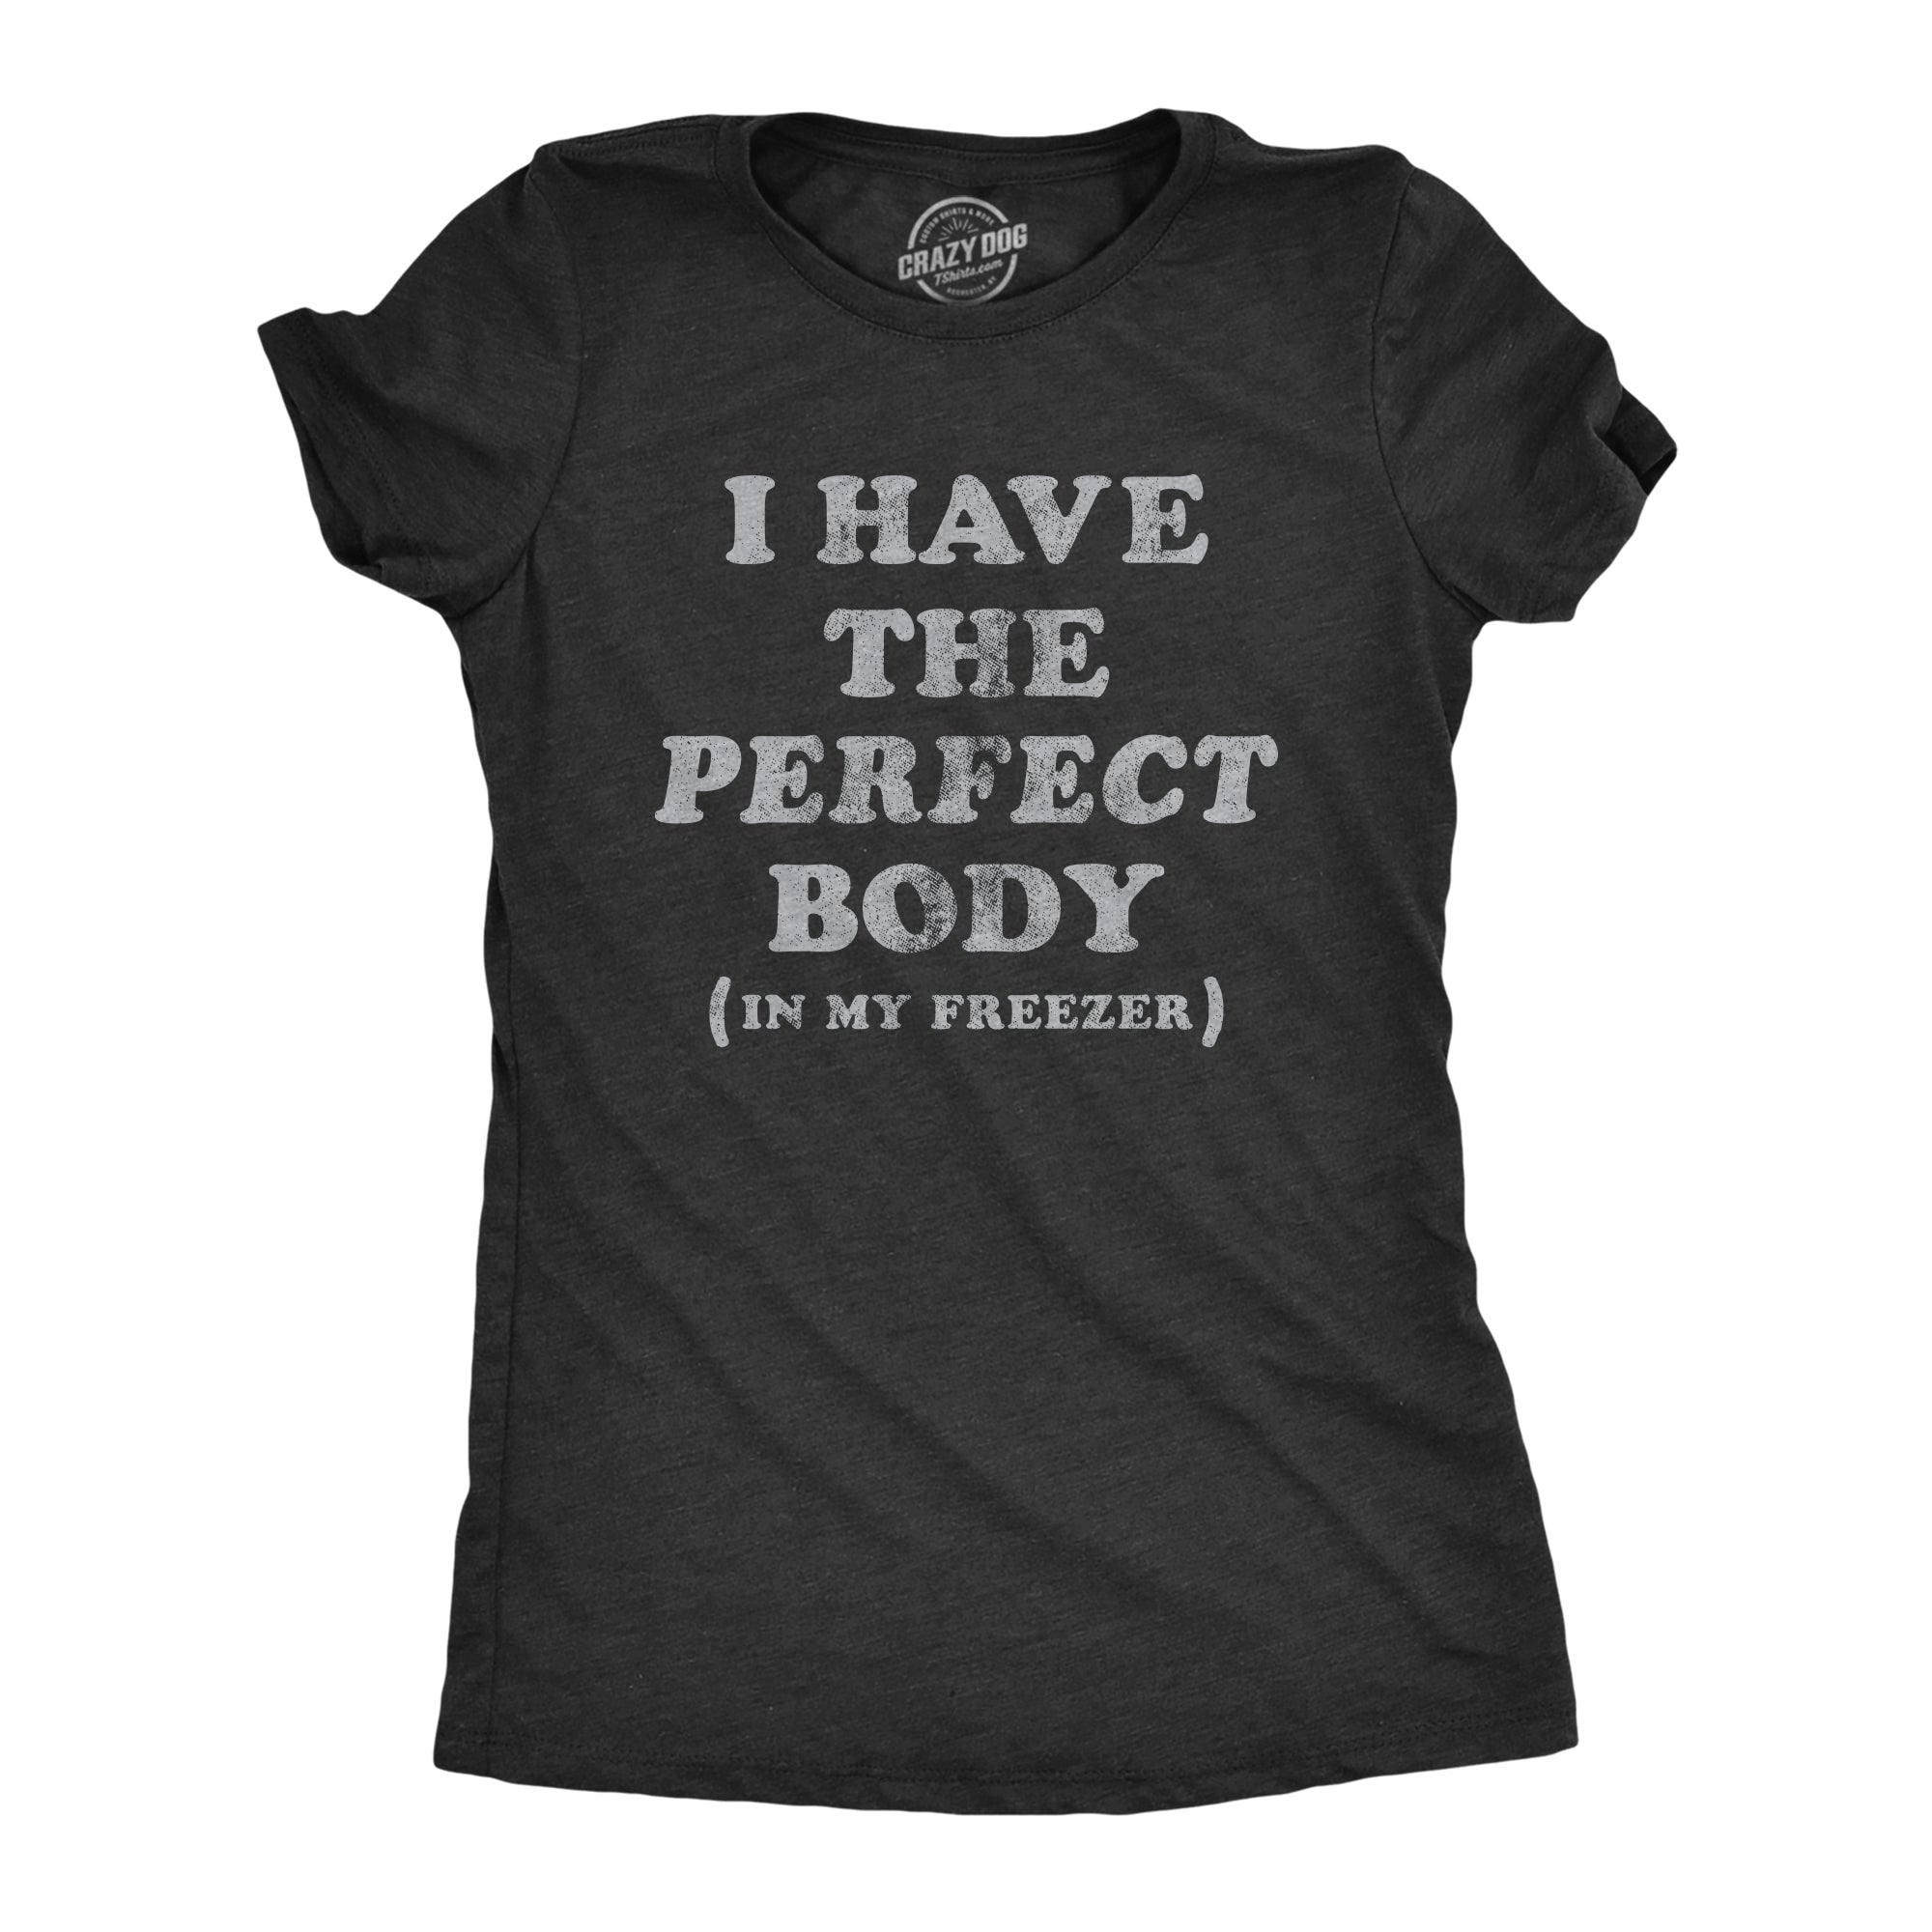 Funny Heather Black I Have The Perfect Body In My Freezer Womens T Shirt Nerdy Halloween Sarcastic Tee